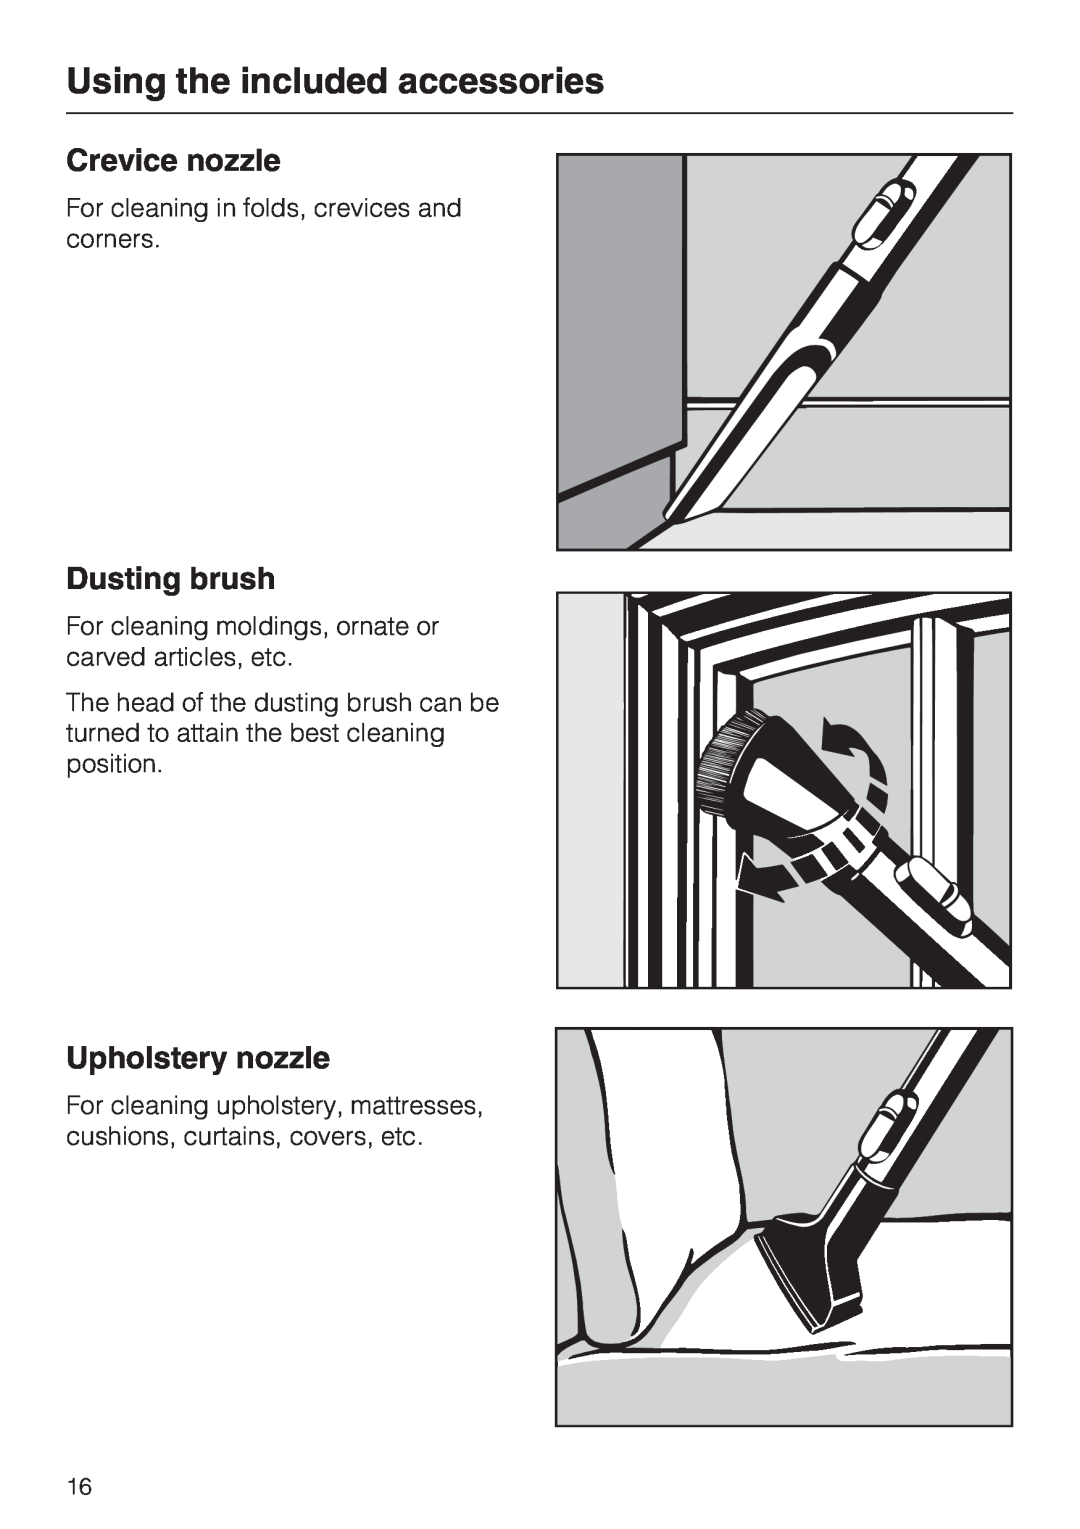 Miele S 700, S 768 manual Using the included accessories, Crevice nozzle, Dusting brush, Upholstery nozzle 